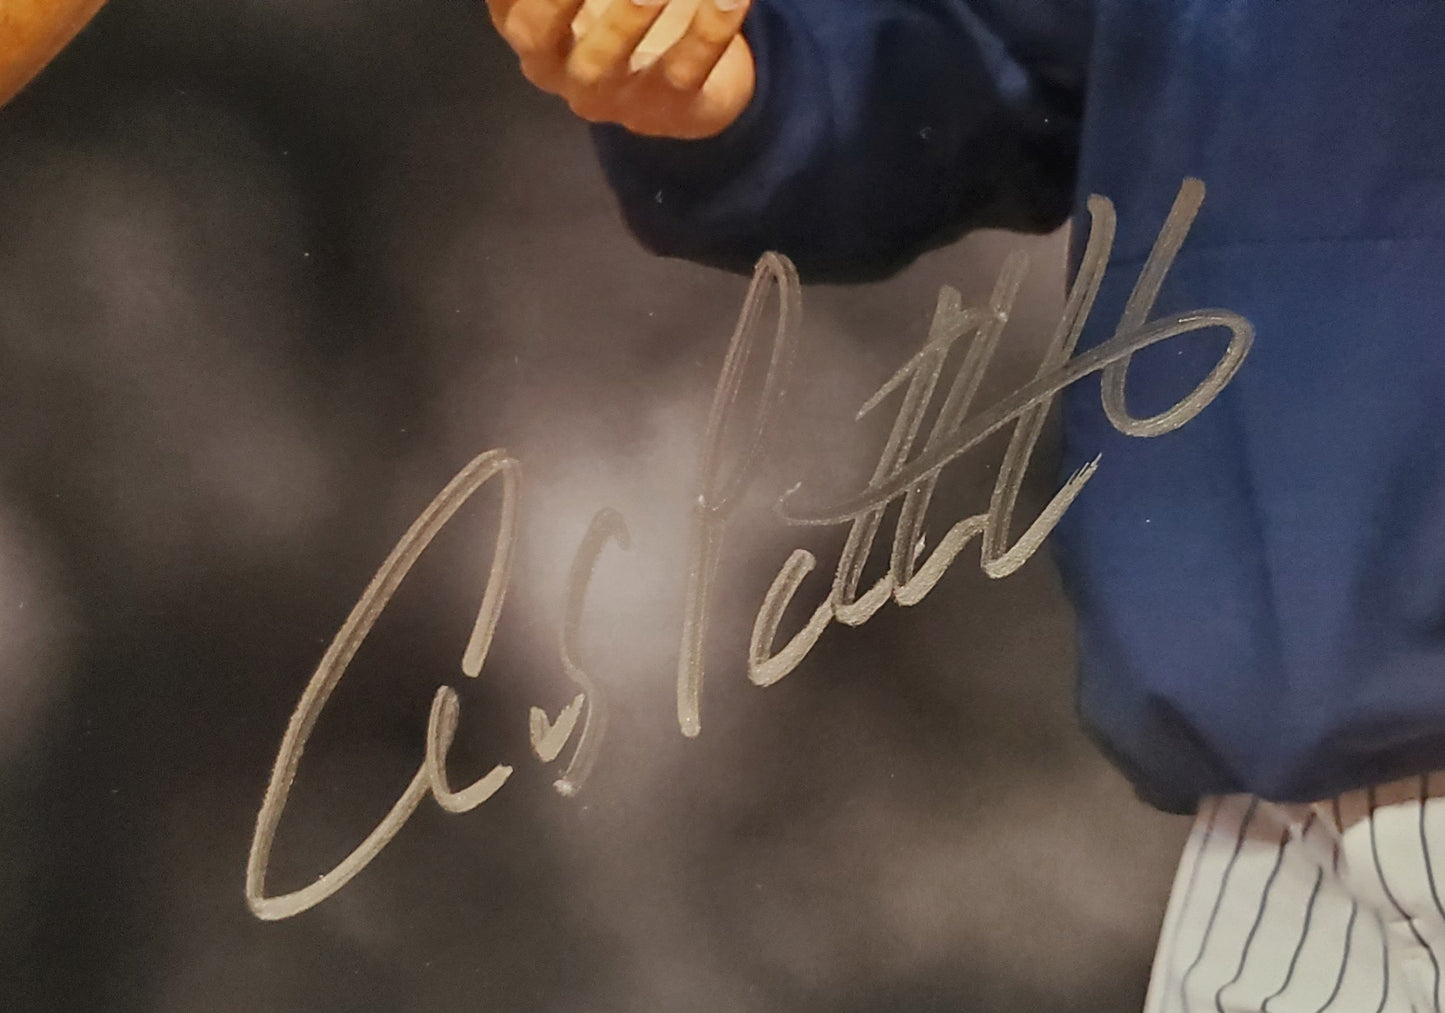 Mariano Rivera New York Yankees Hall Of Fame Pitcher Is Relieved By Derek Jeter, and Andy Pettitte 11x14 Photo Autographed By Mariano Rivera & Andy Pettitte